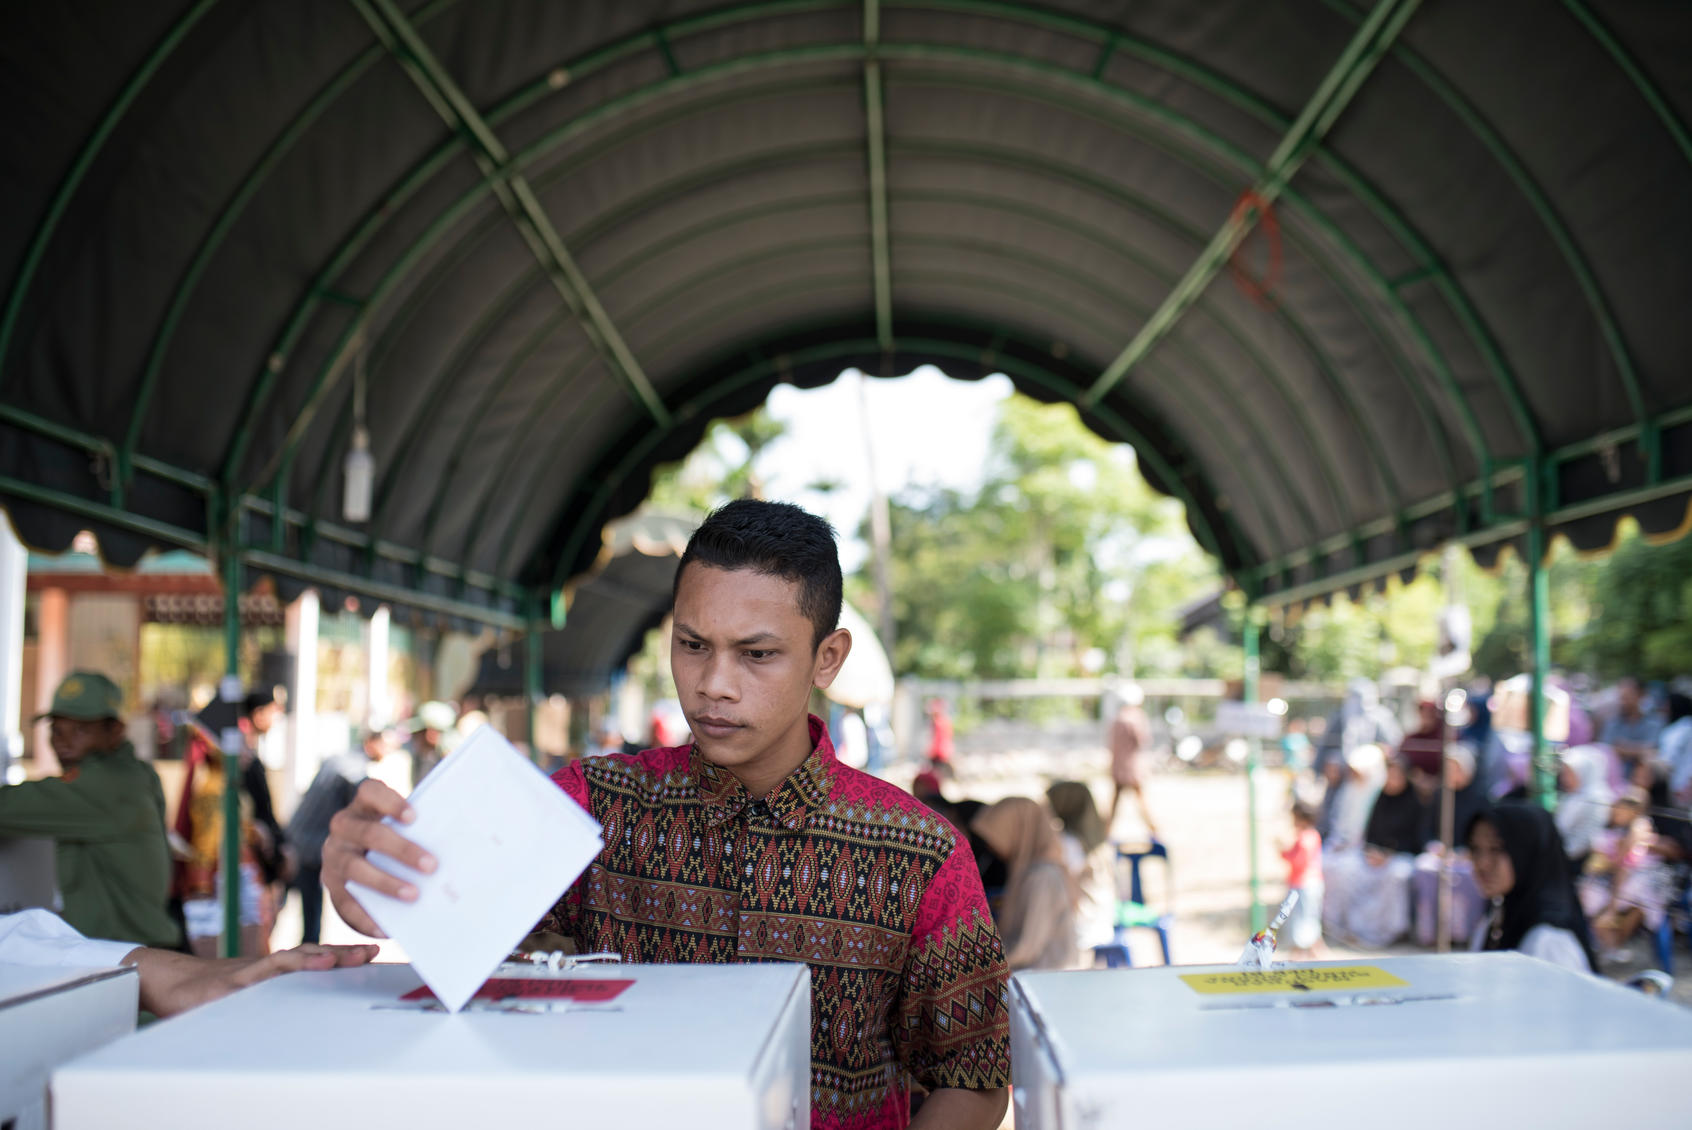 Indonesia's Unlikely Democracy Remains Resilient